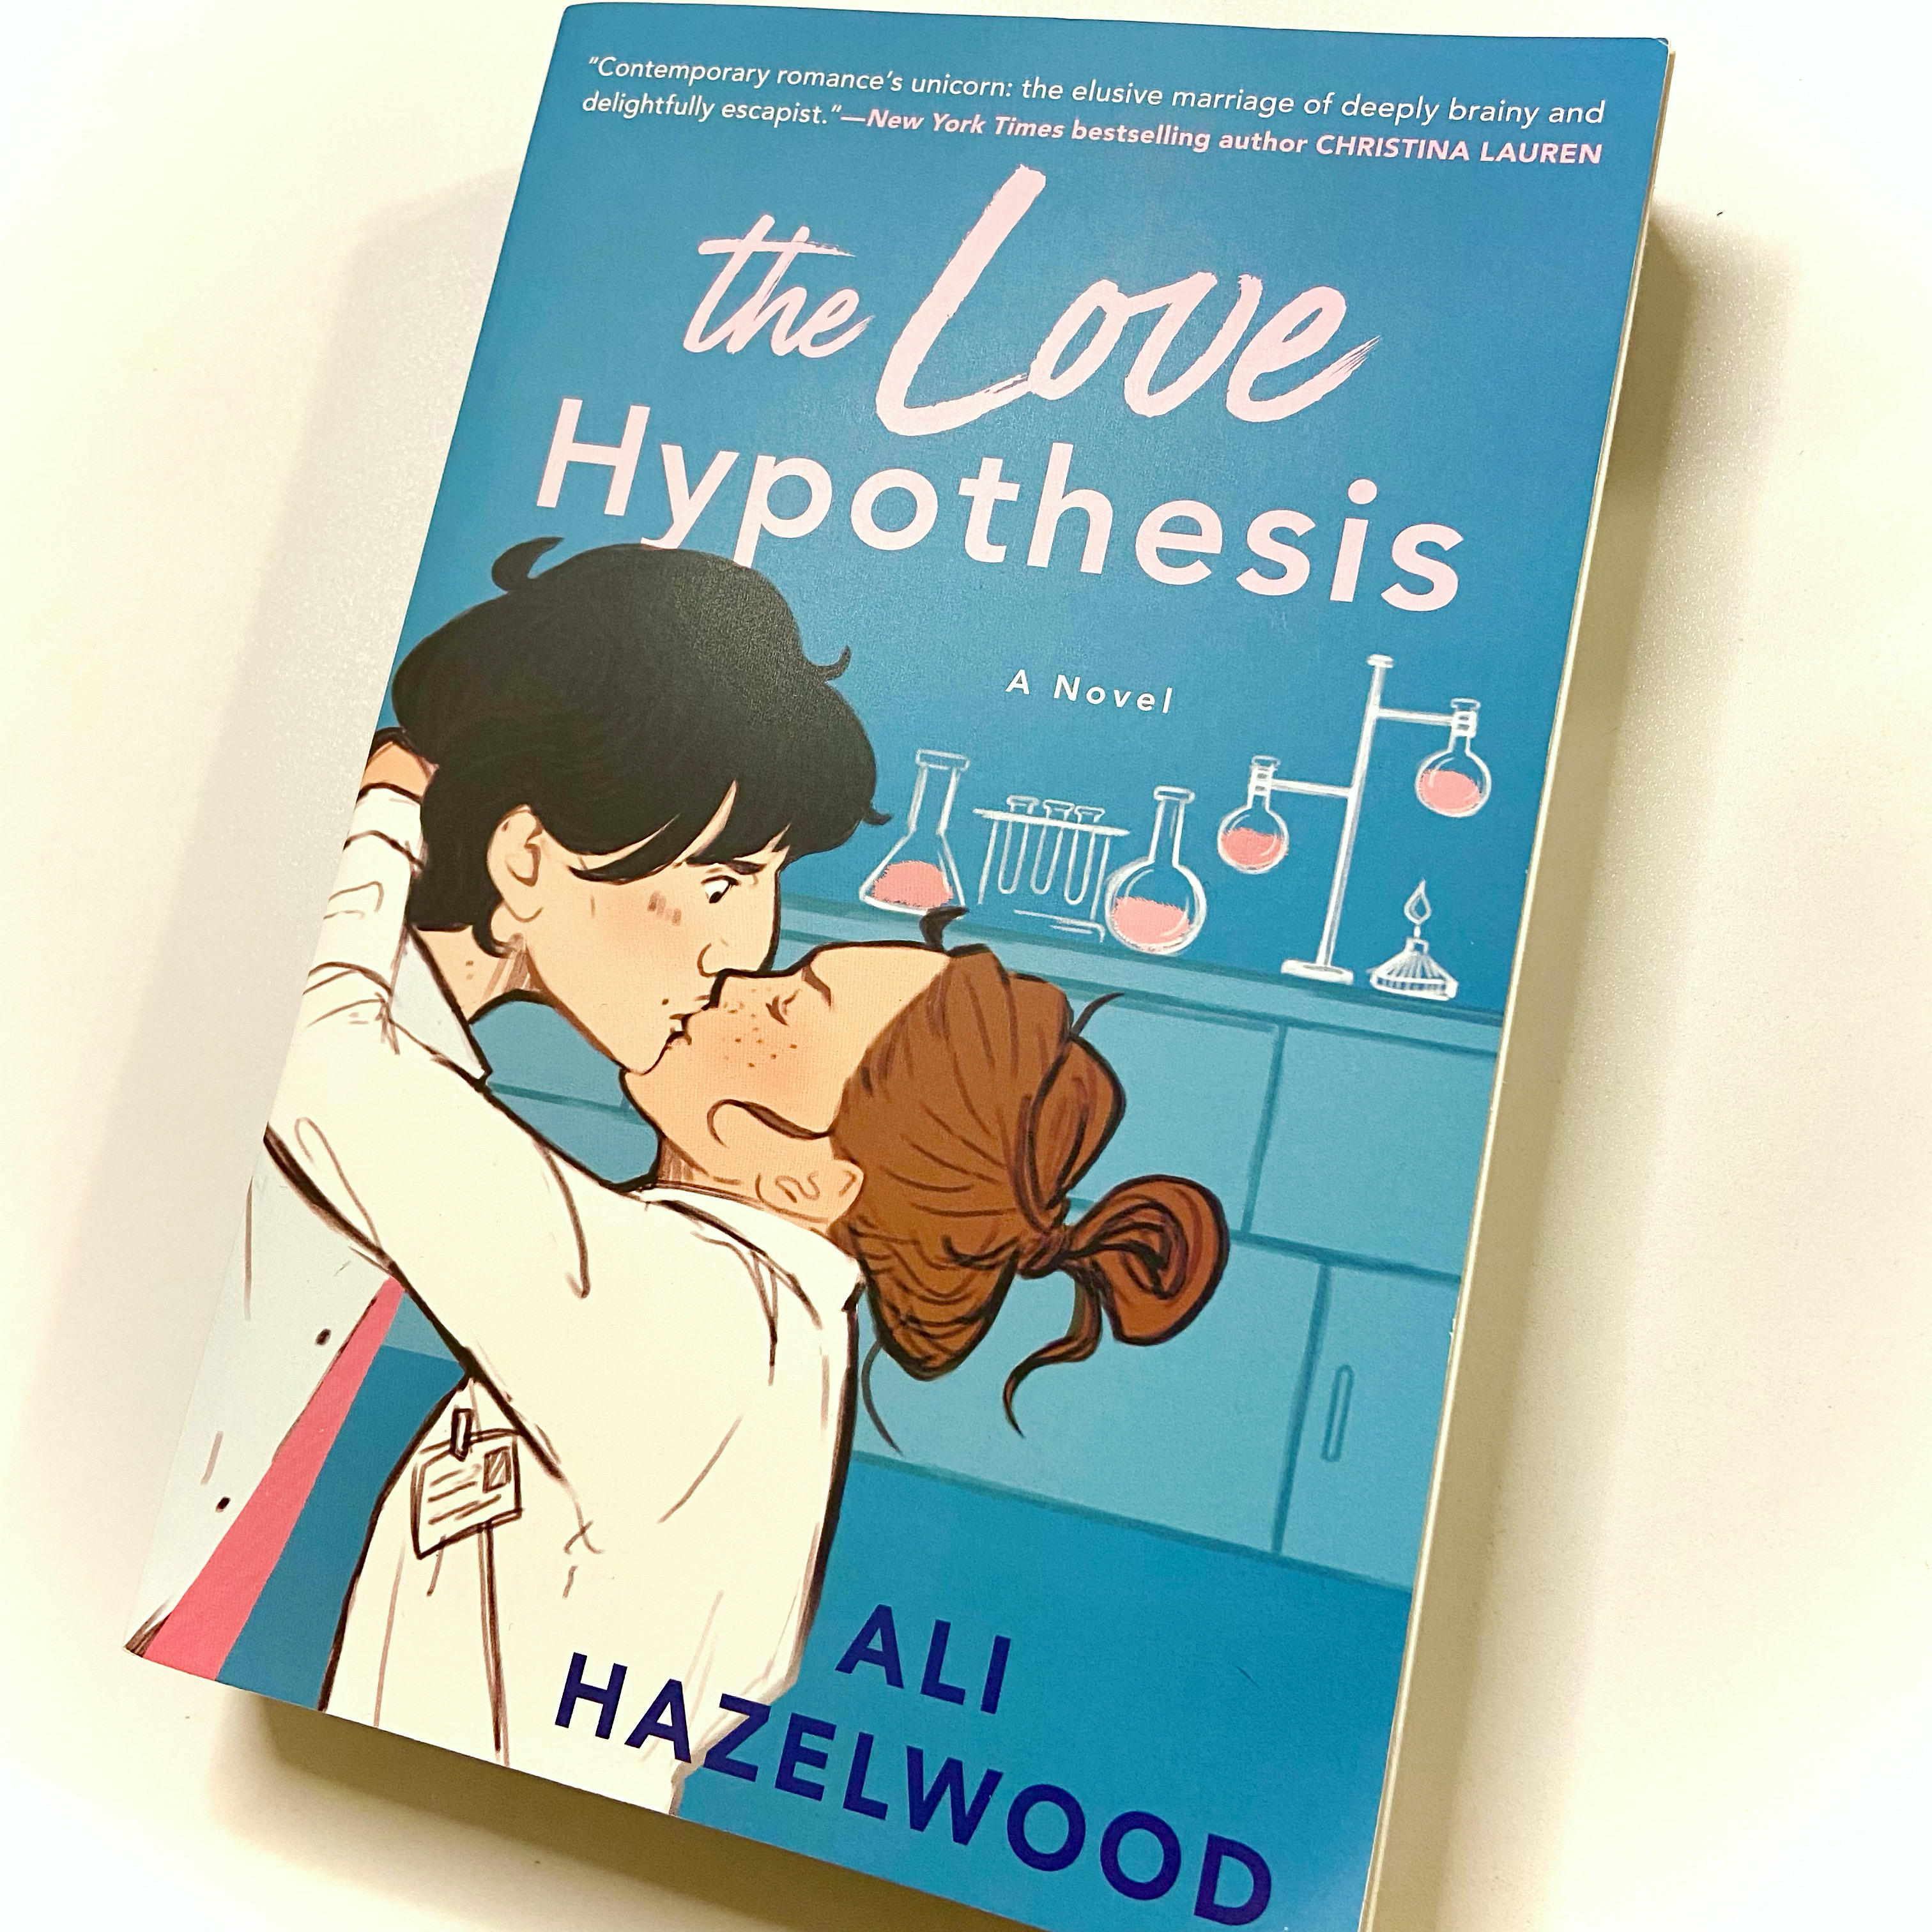 the love hypothesis book review